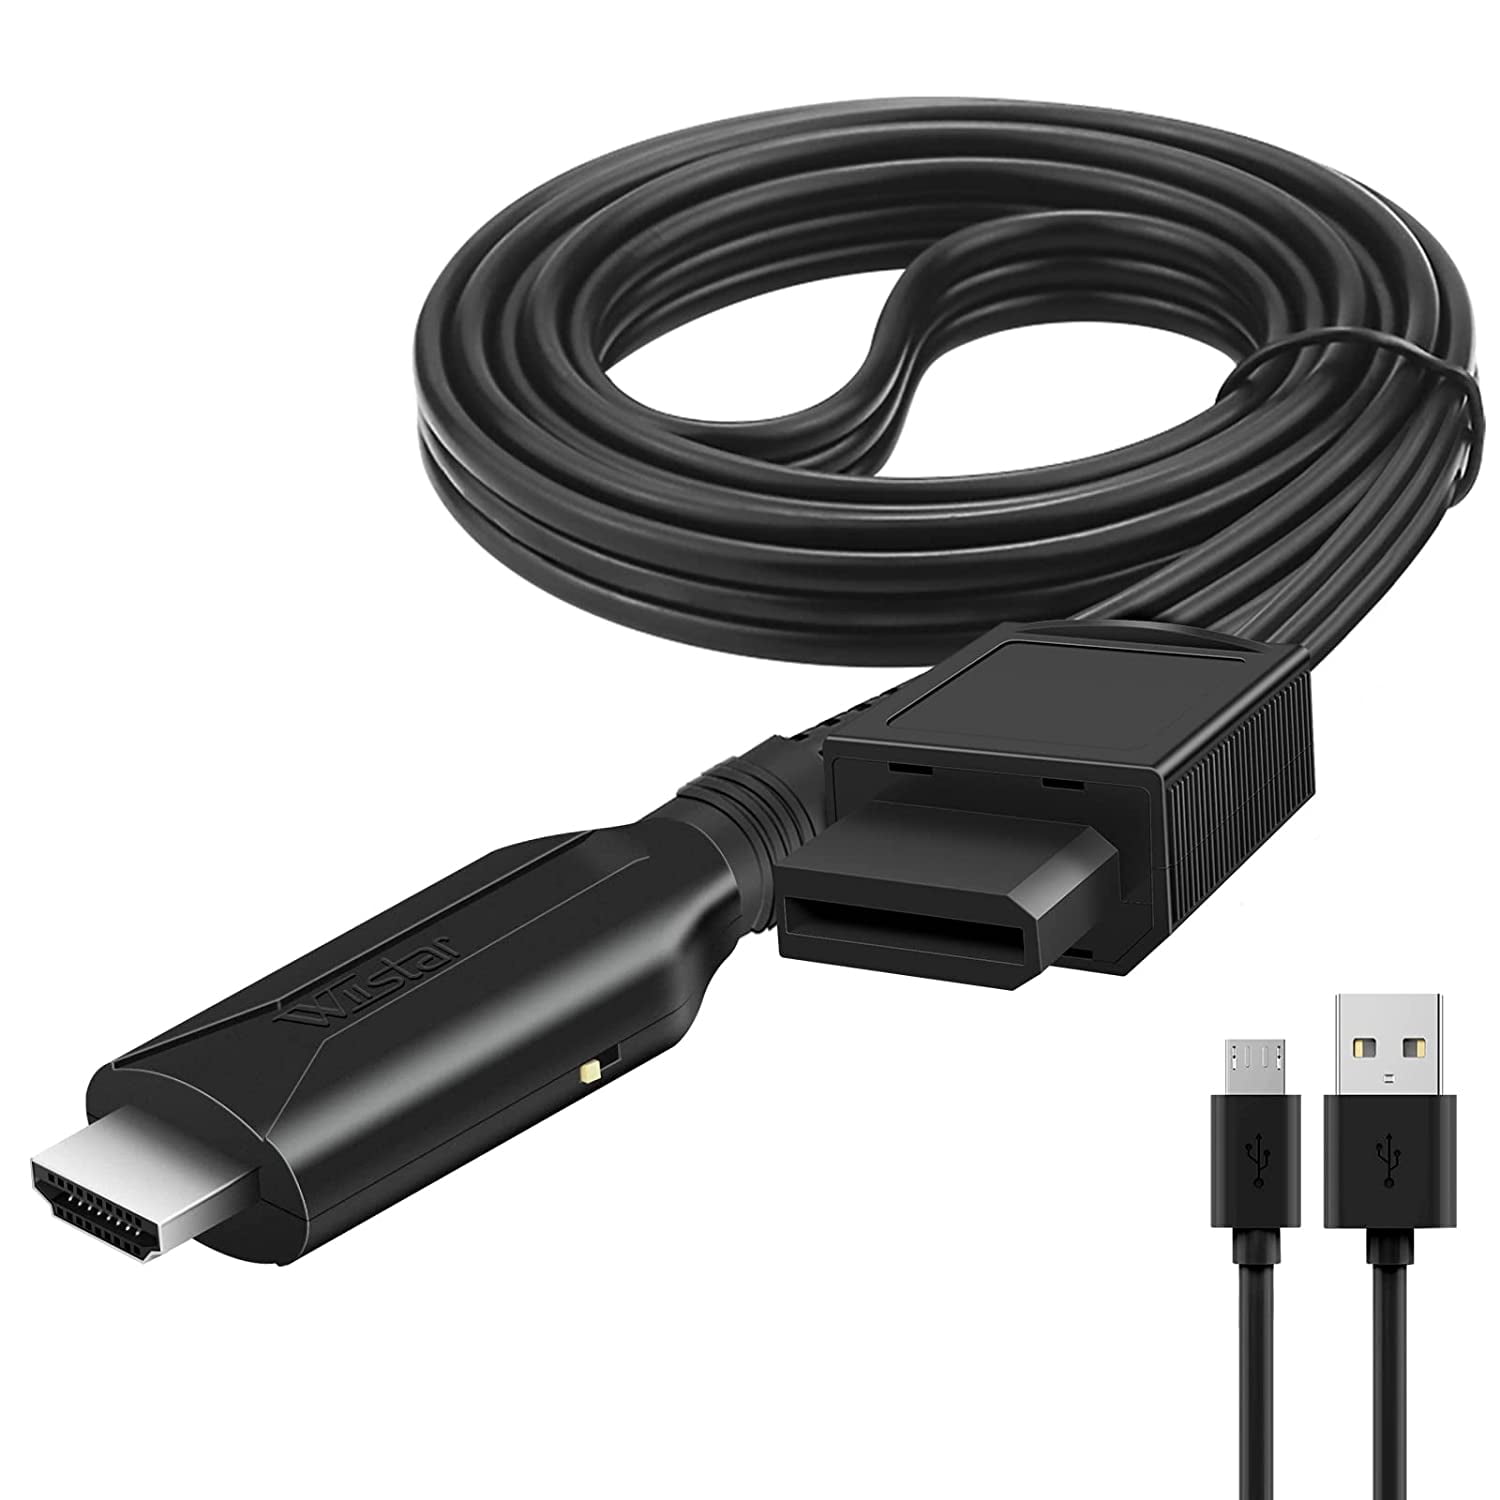 YoK HDMI Travel Cable For Nintendo Switch That Makes It Easy To Play On A  TV Screen When You Travel Without Needing The Entire Dock - 10 Foot Reach